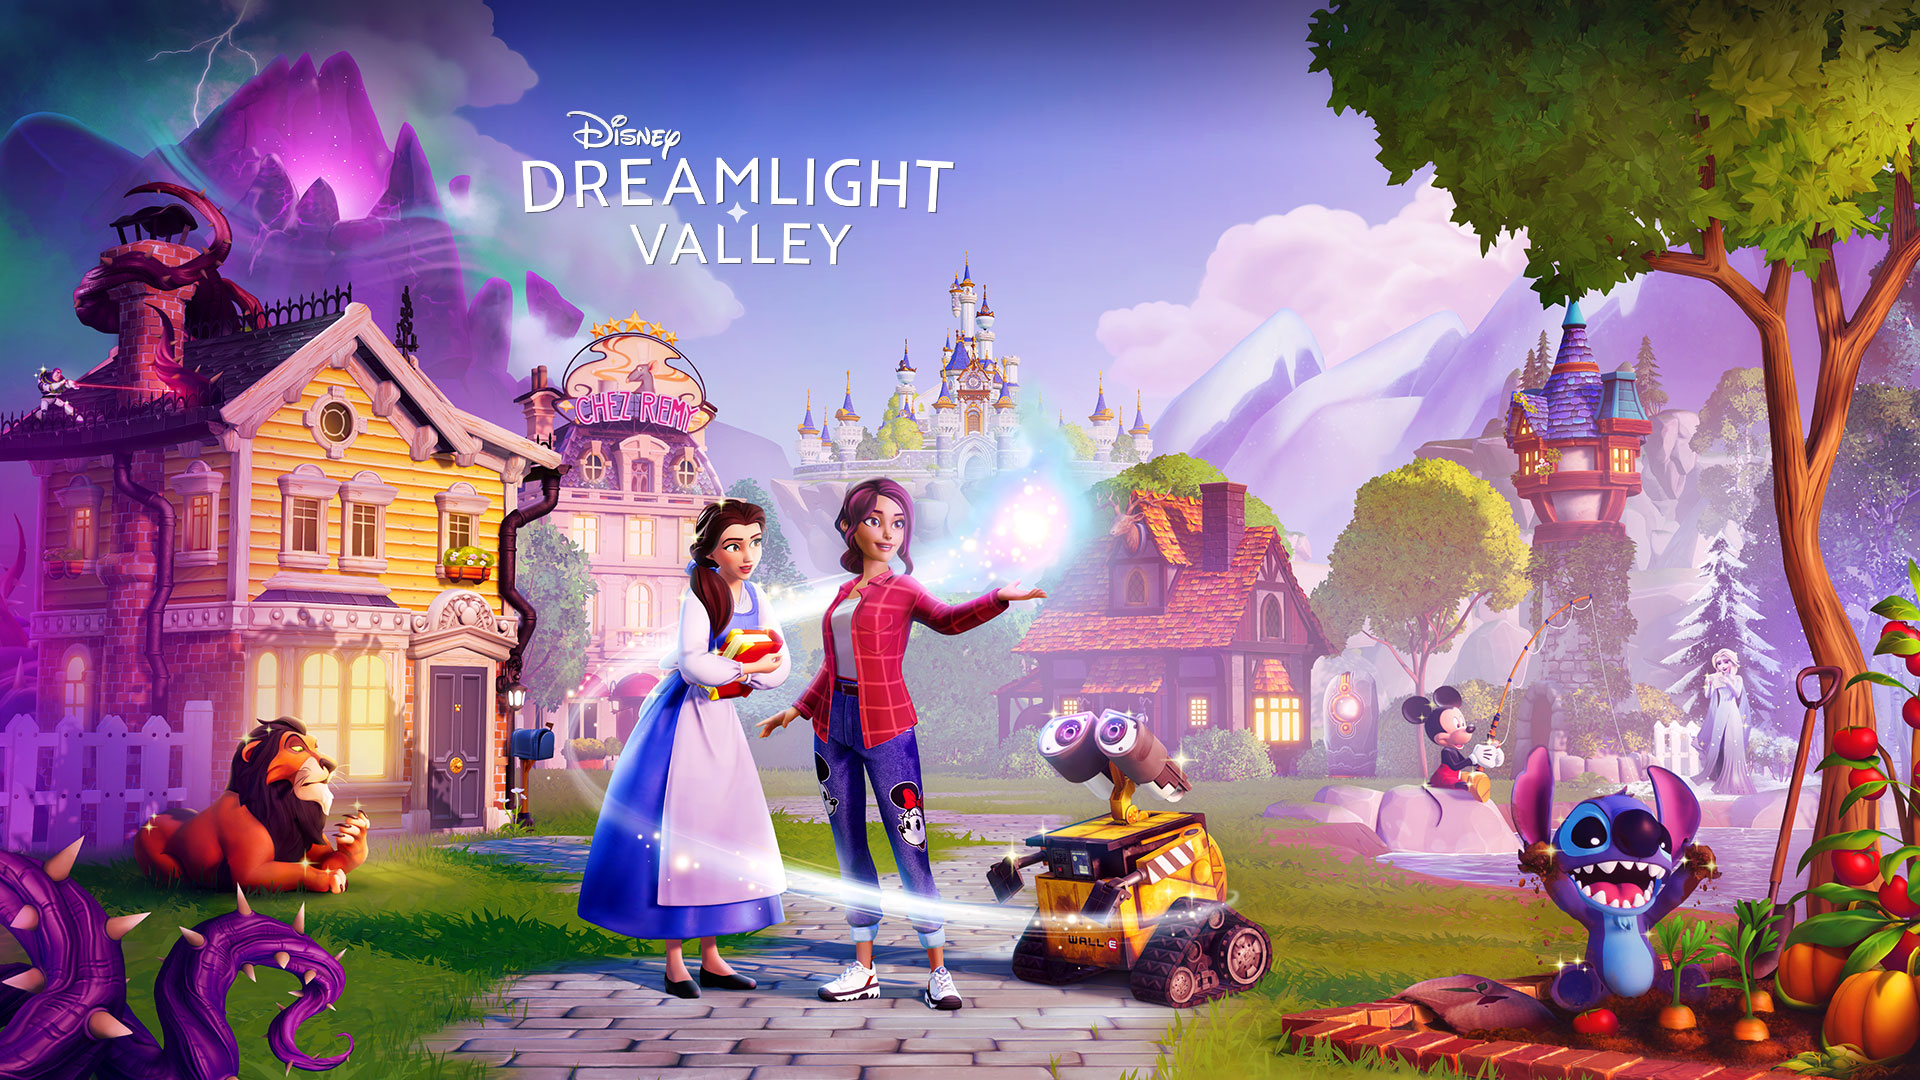 Disney Dreamlight Valley, Disney characters such as Belle and Wall-E gather around a player in a quaint town. 